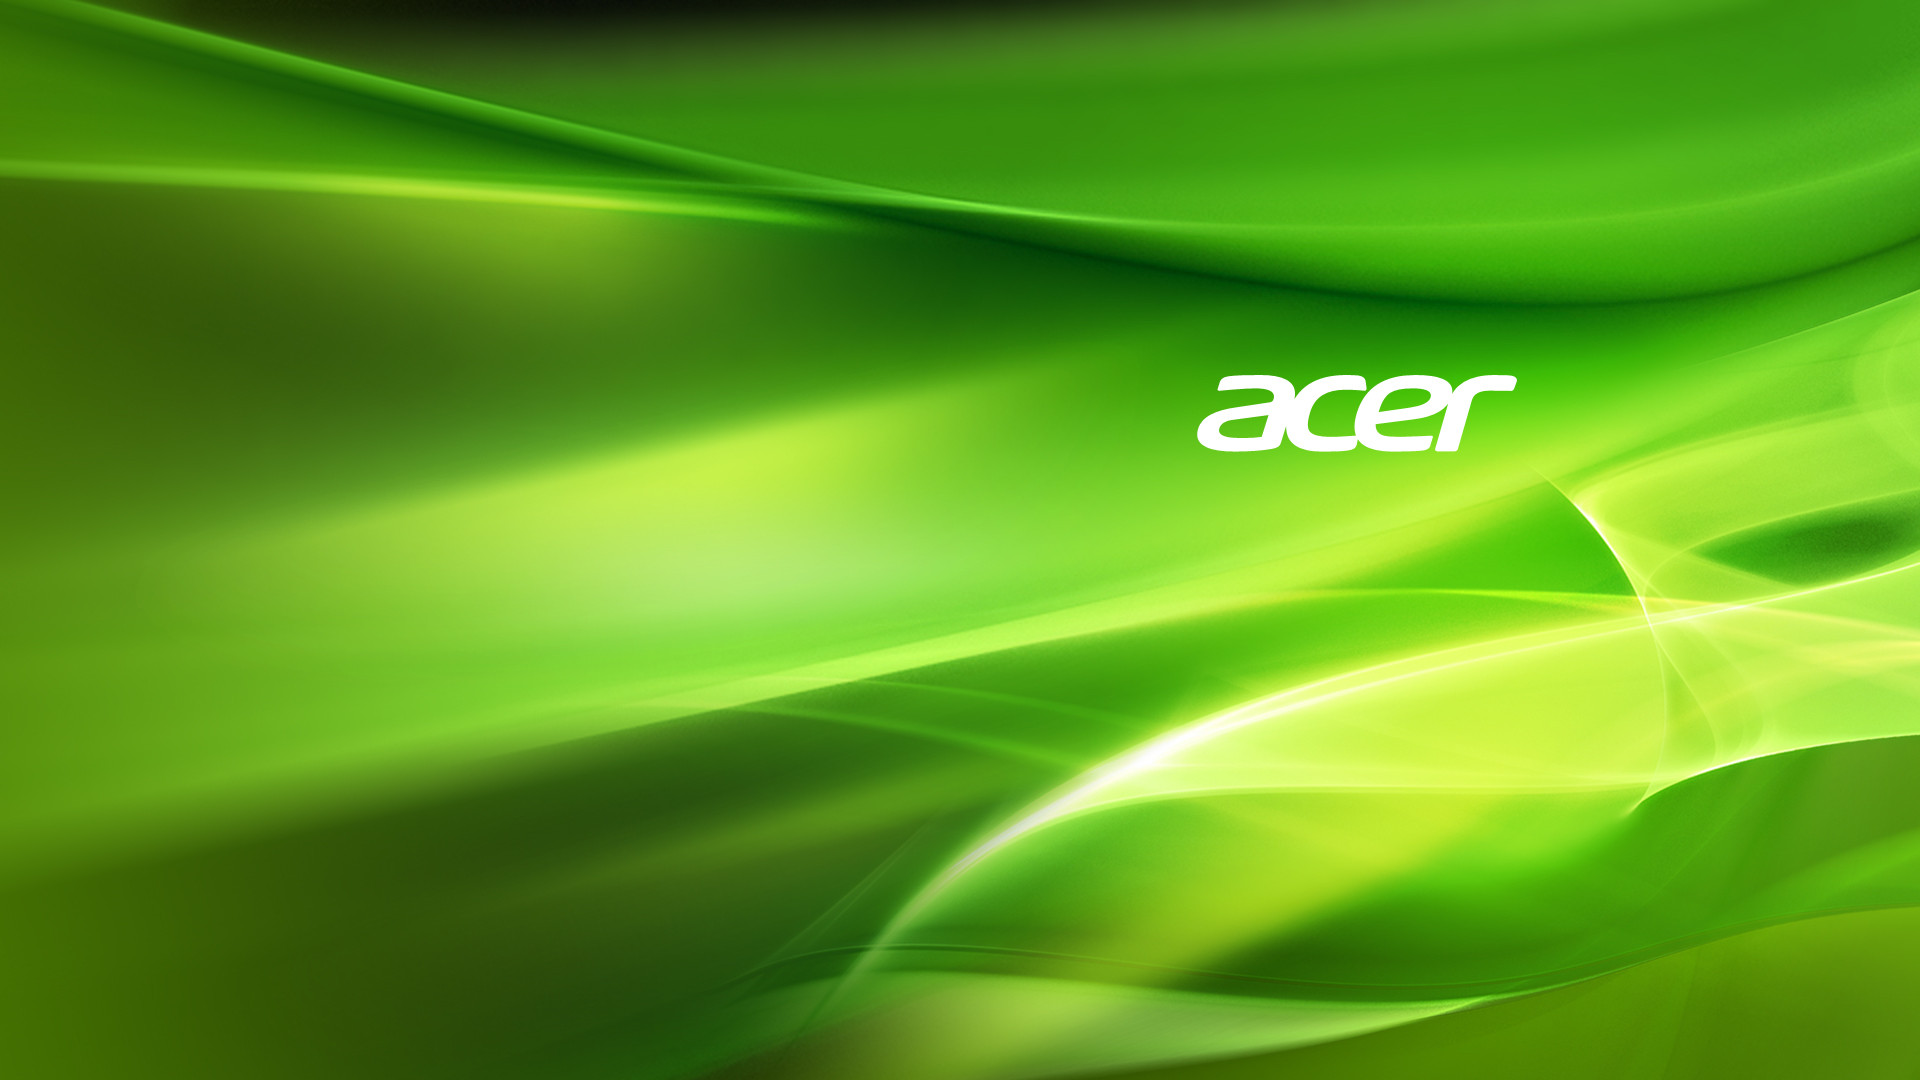 Acer Veriton Wallpapers 2015